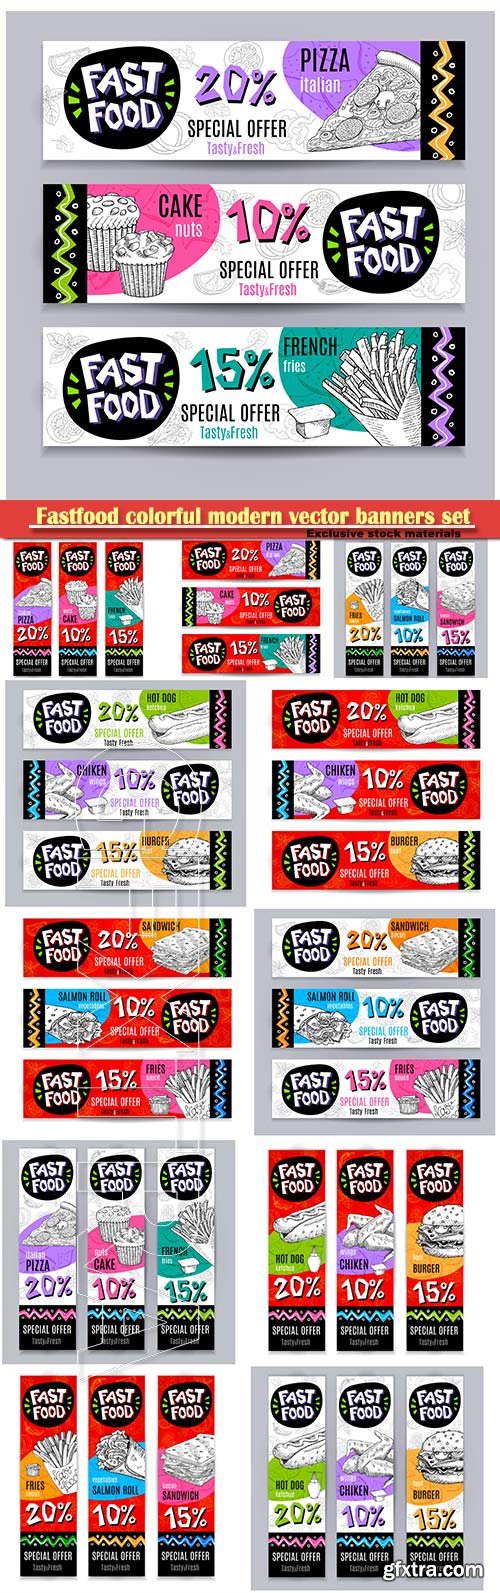 Fast Food colorful modern vector banners set